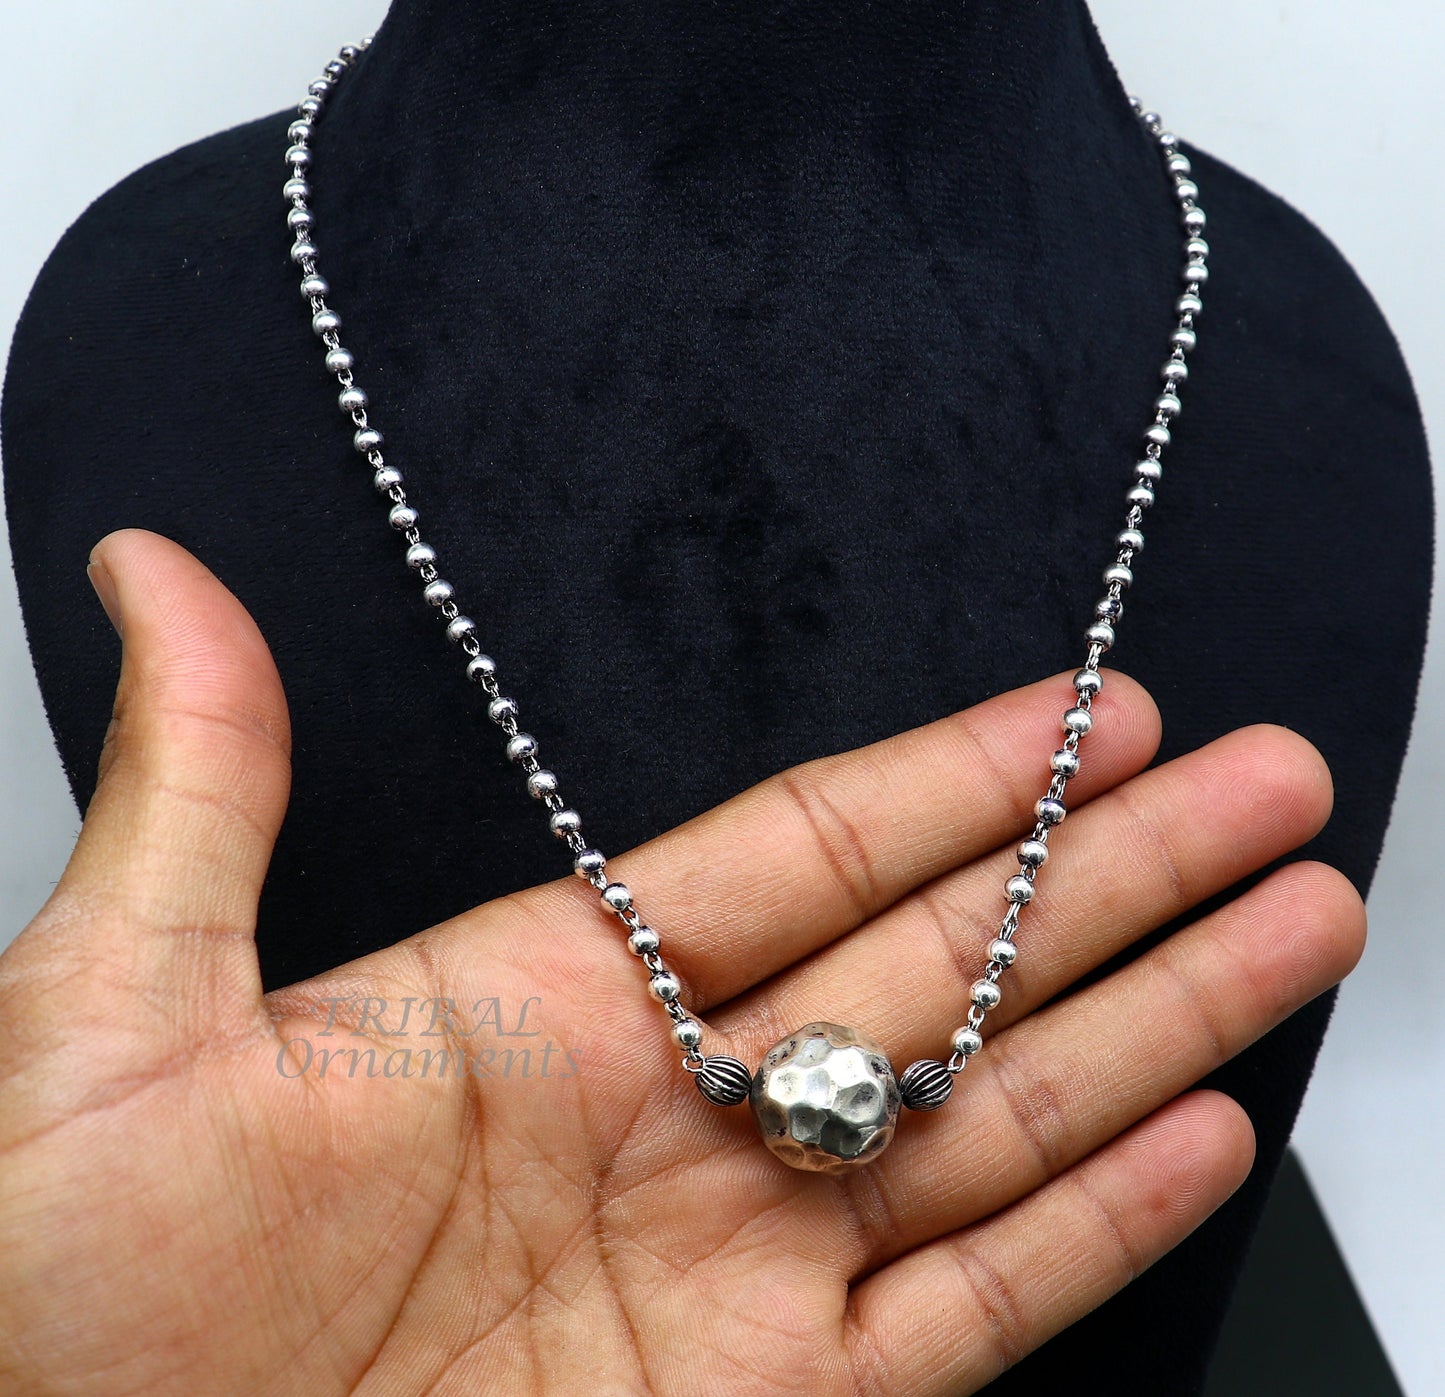 925 sterling silver 4mm beads ball chain necklace with gorgeous antique design ball pendant customized tribal classical jewelry set532 - TRIBAL ORNAMENTS